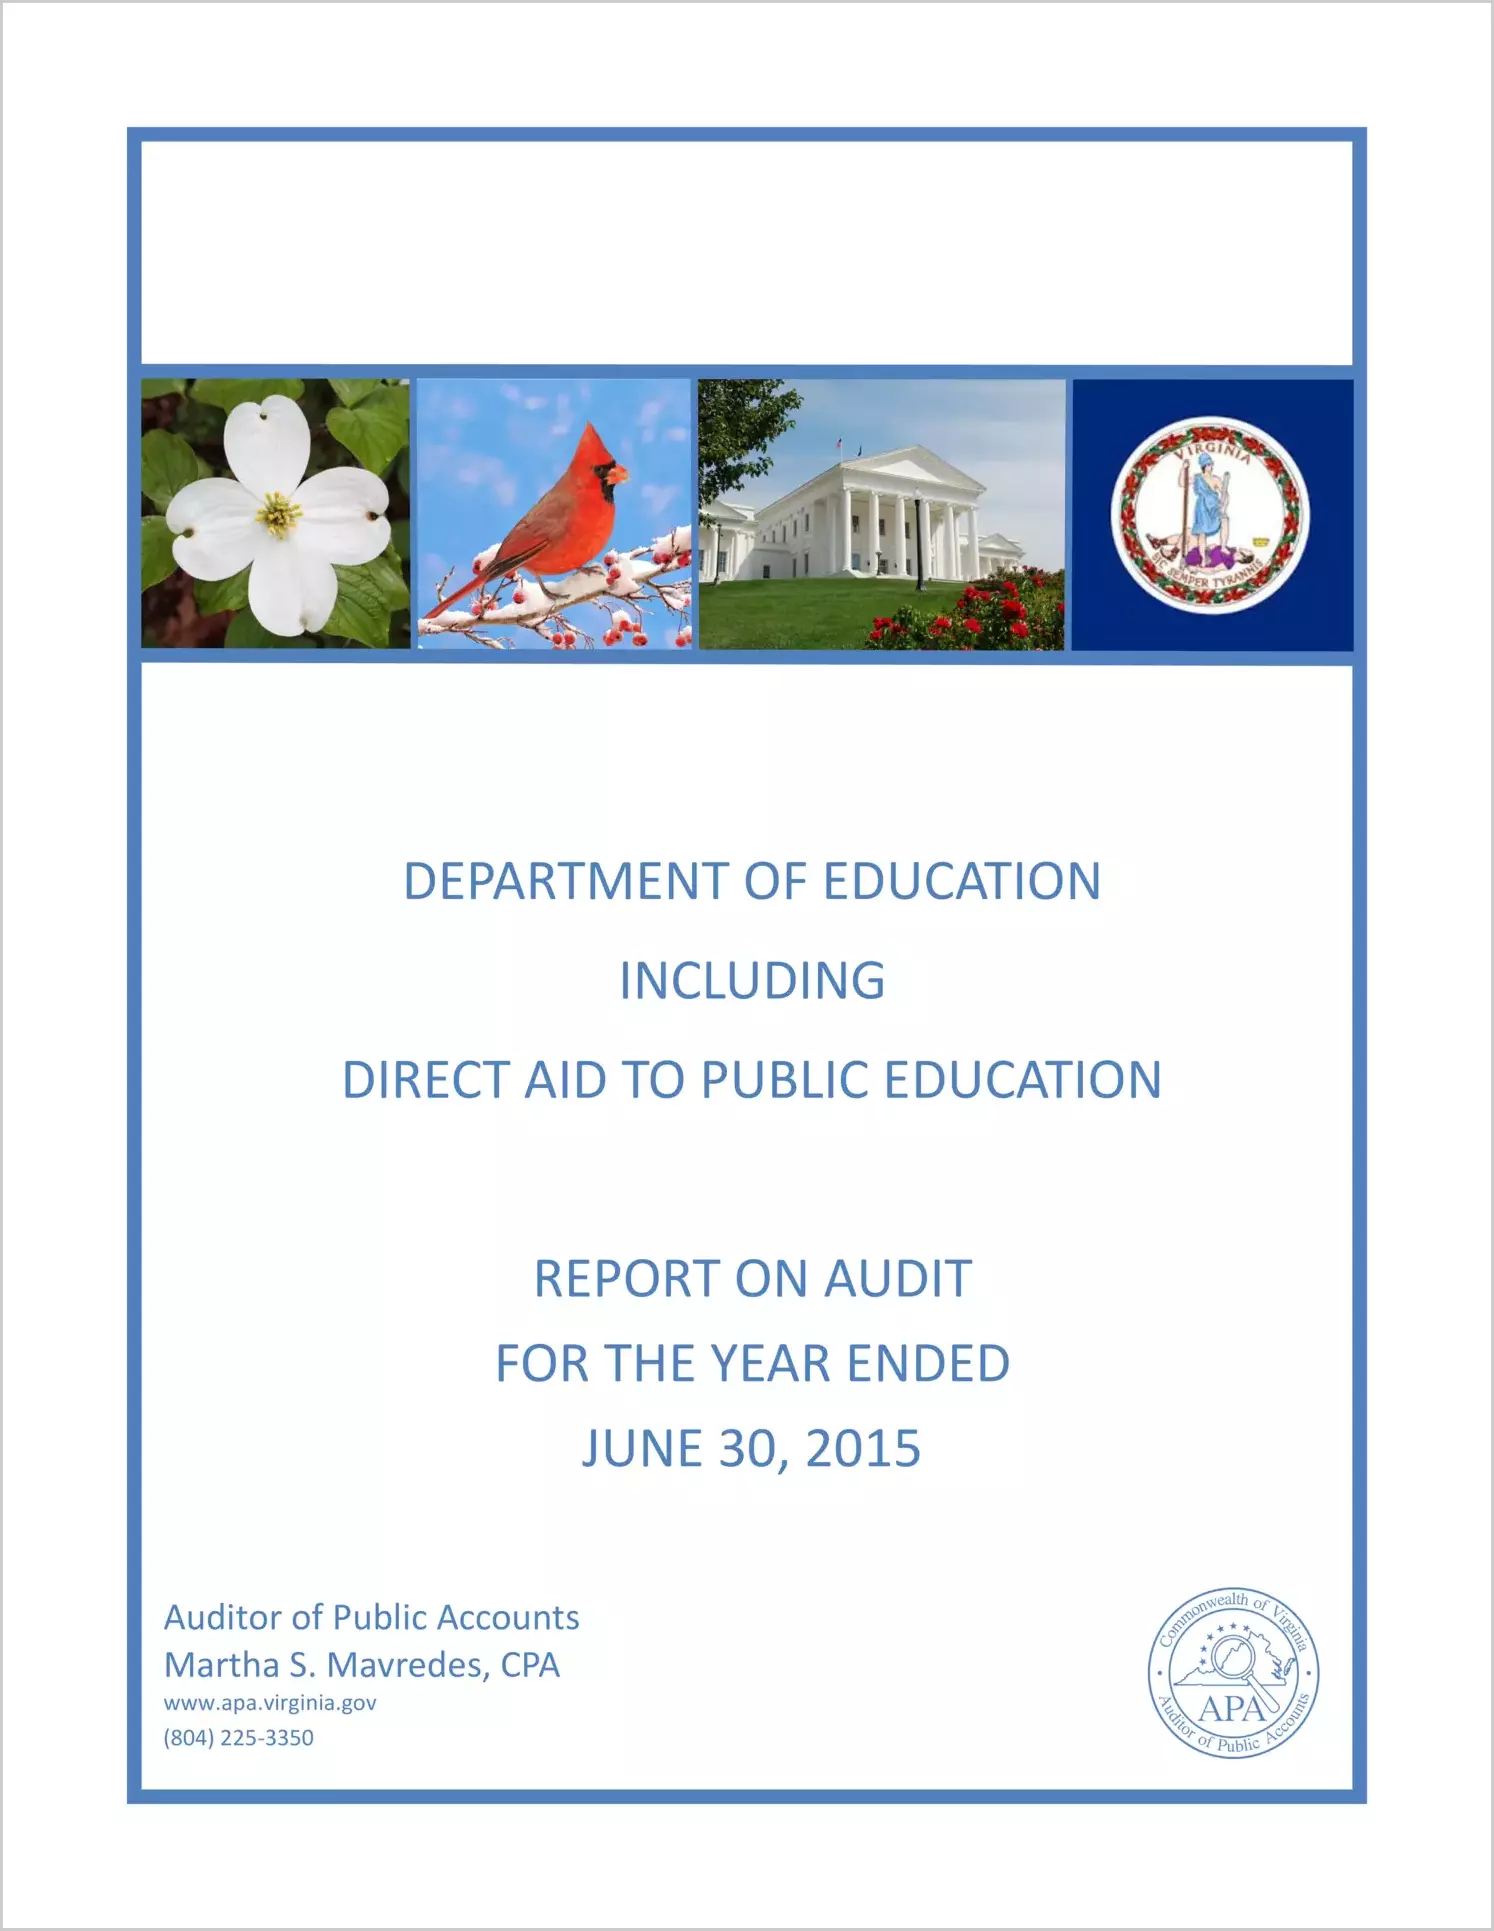 Department of Education Including Direct Aid to Public Education for the year ended June 30, 2015